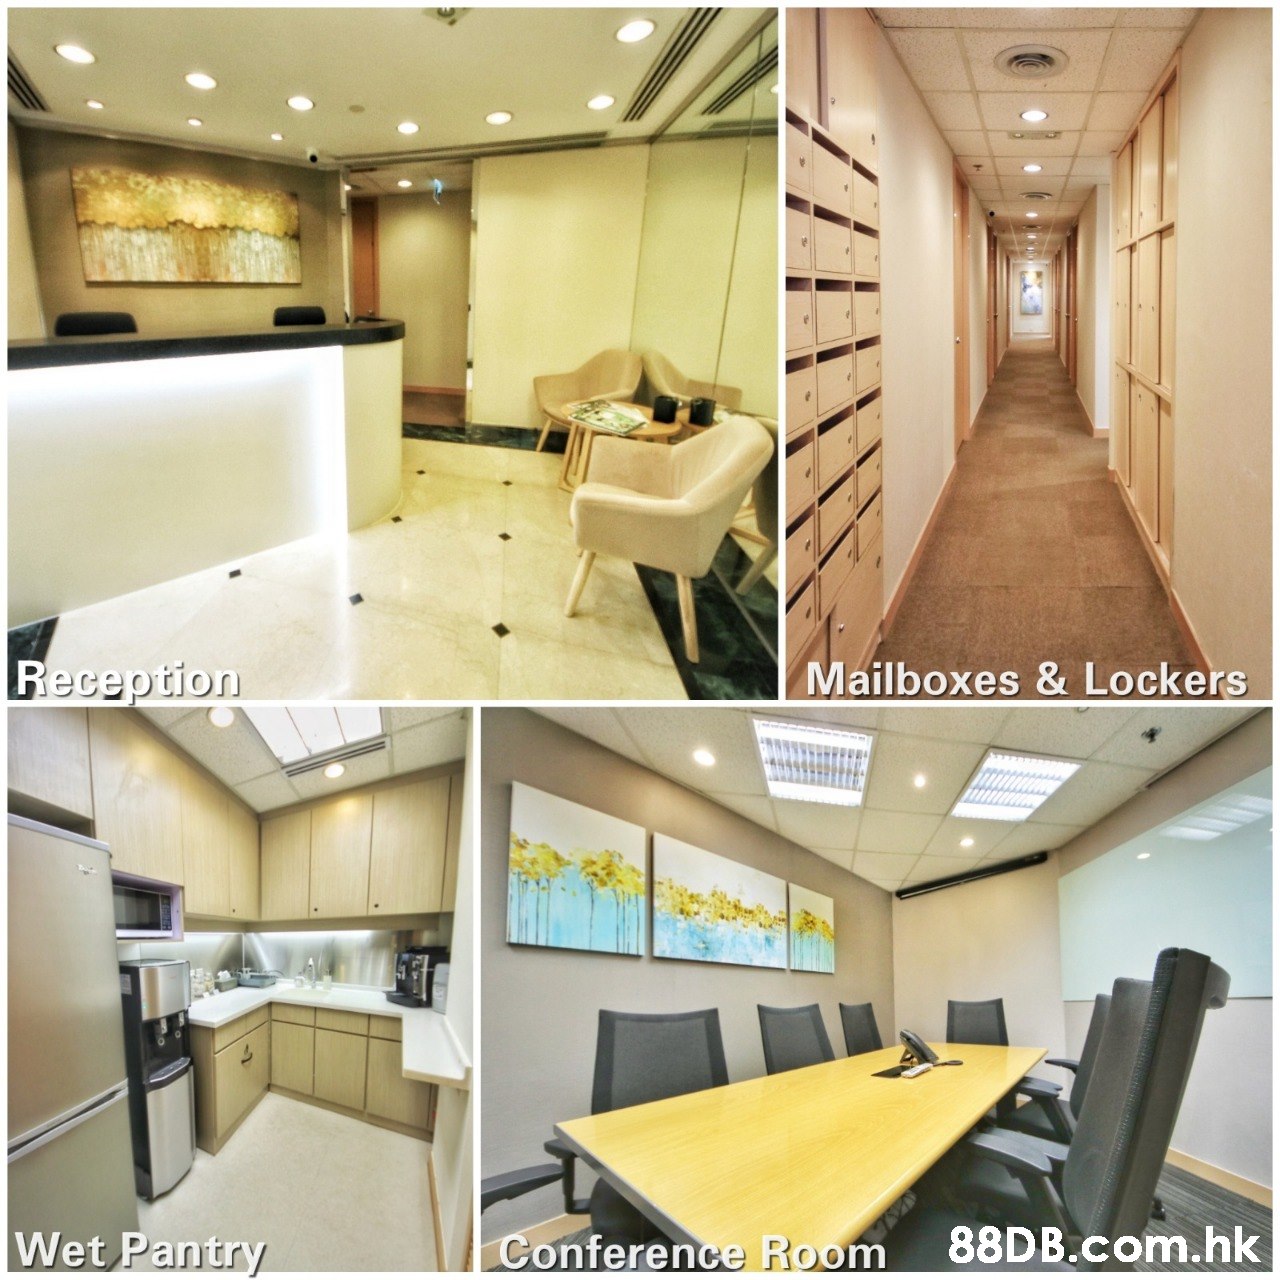 Reception Mailboxes & Lockers Wet Pantry .hk Conference Room  Property,Ceiling,Interior design,Building,Room